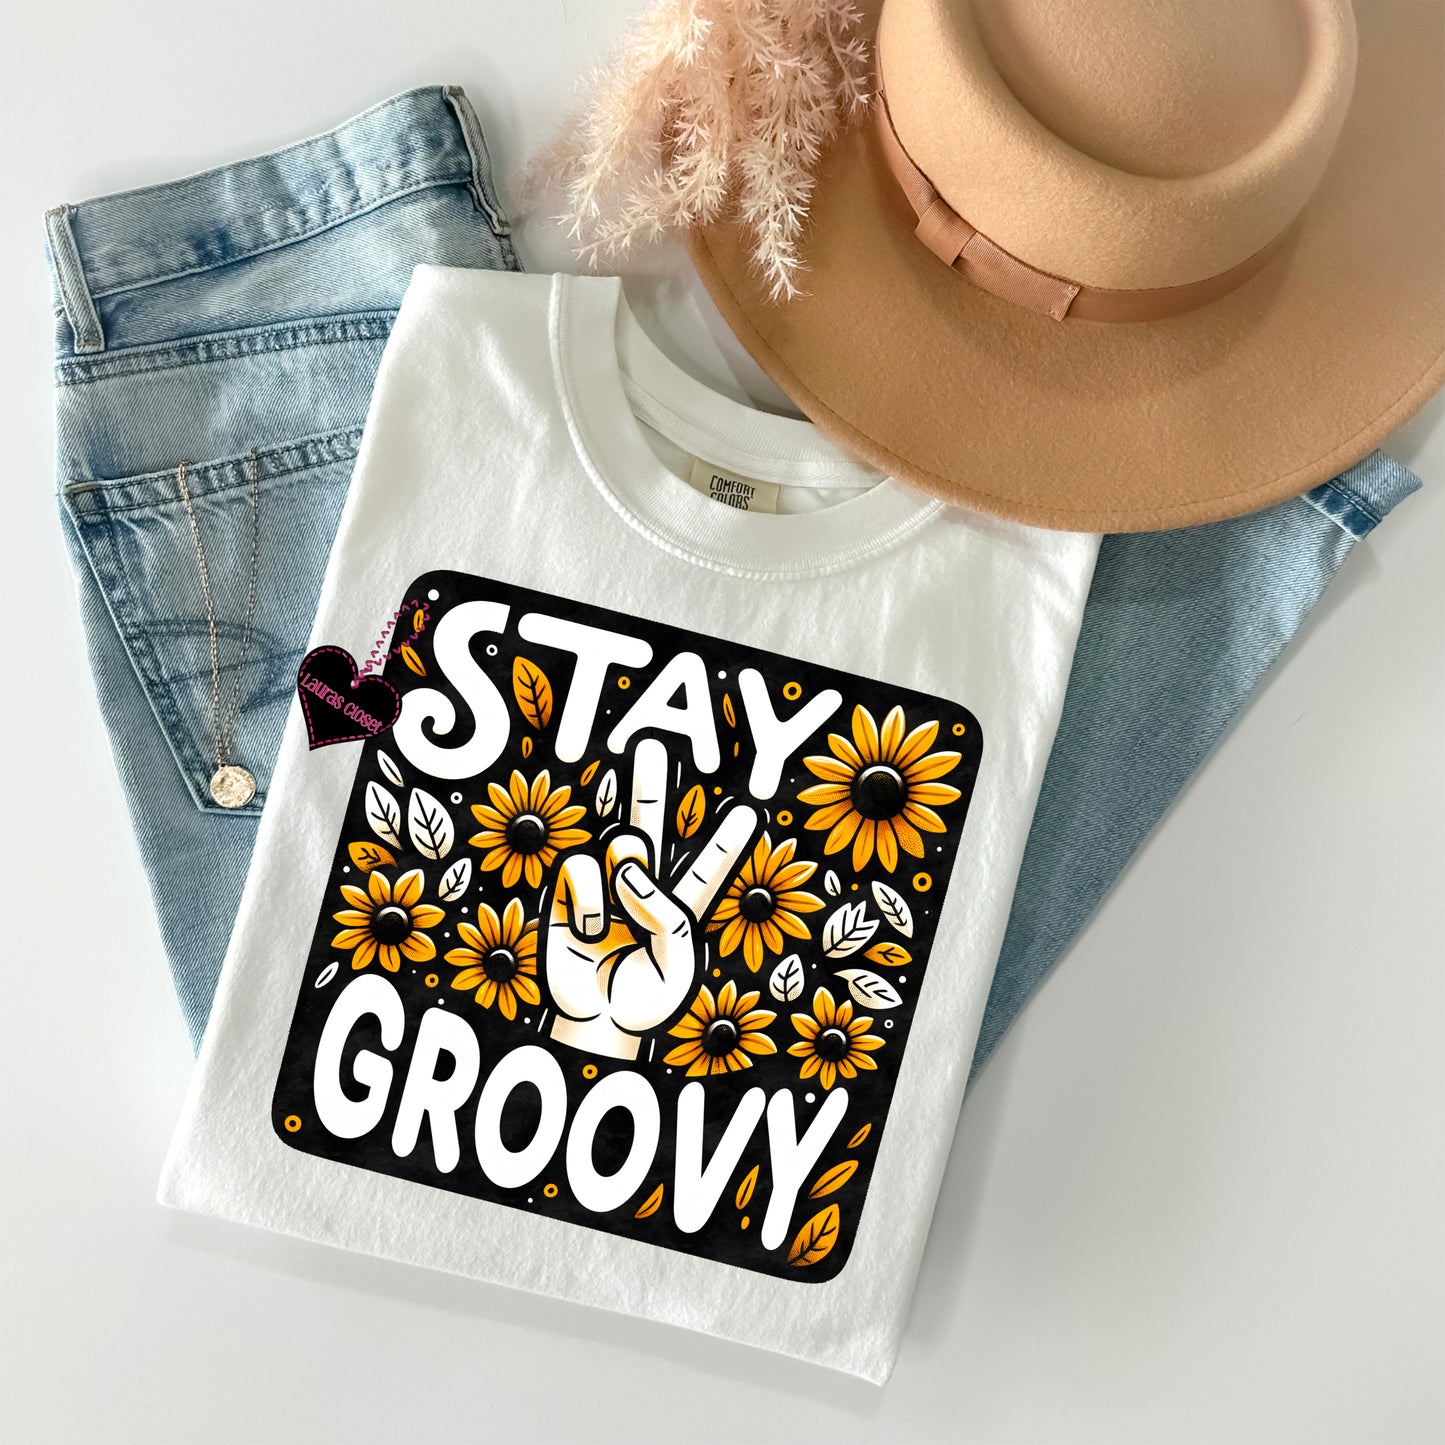 Stay groovy